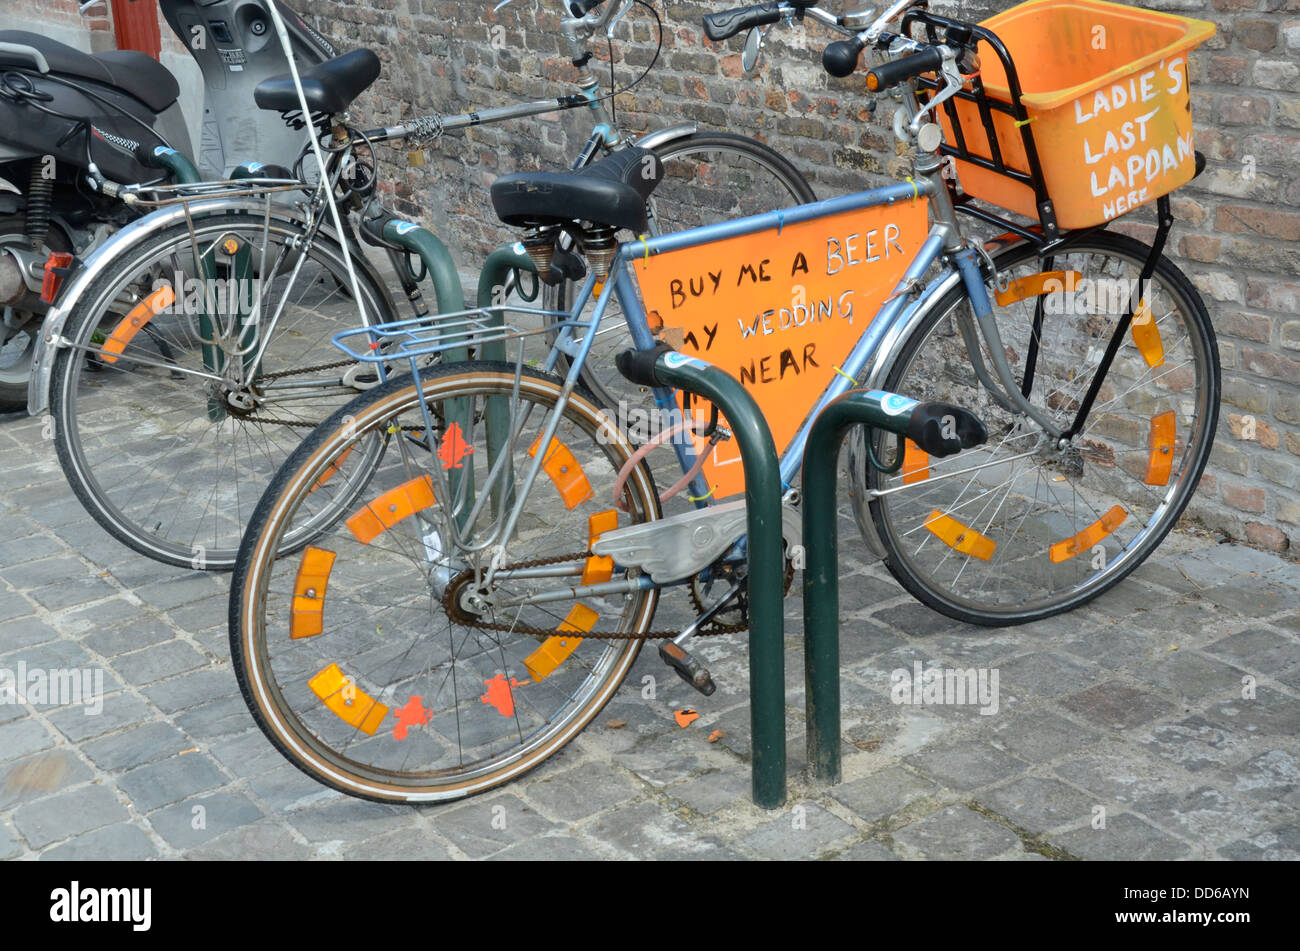 Bicycle advertising venue for stag and hen nights, Bruges, Belgium Stock Photo